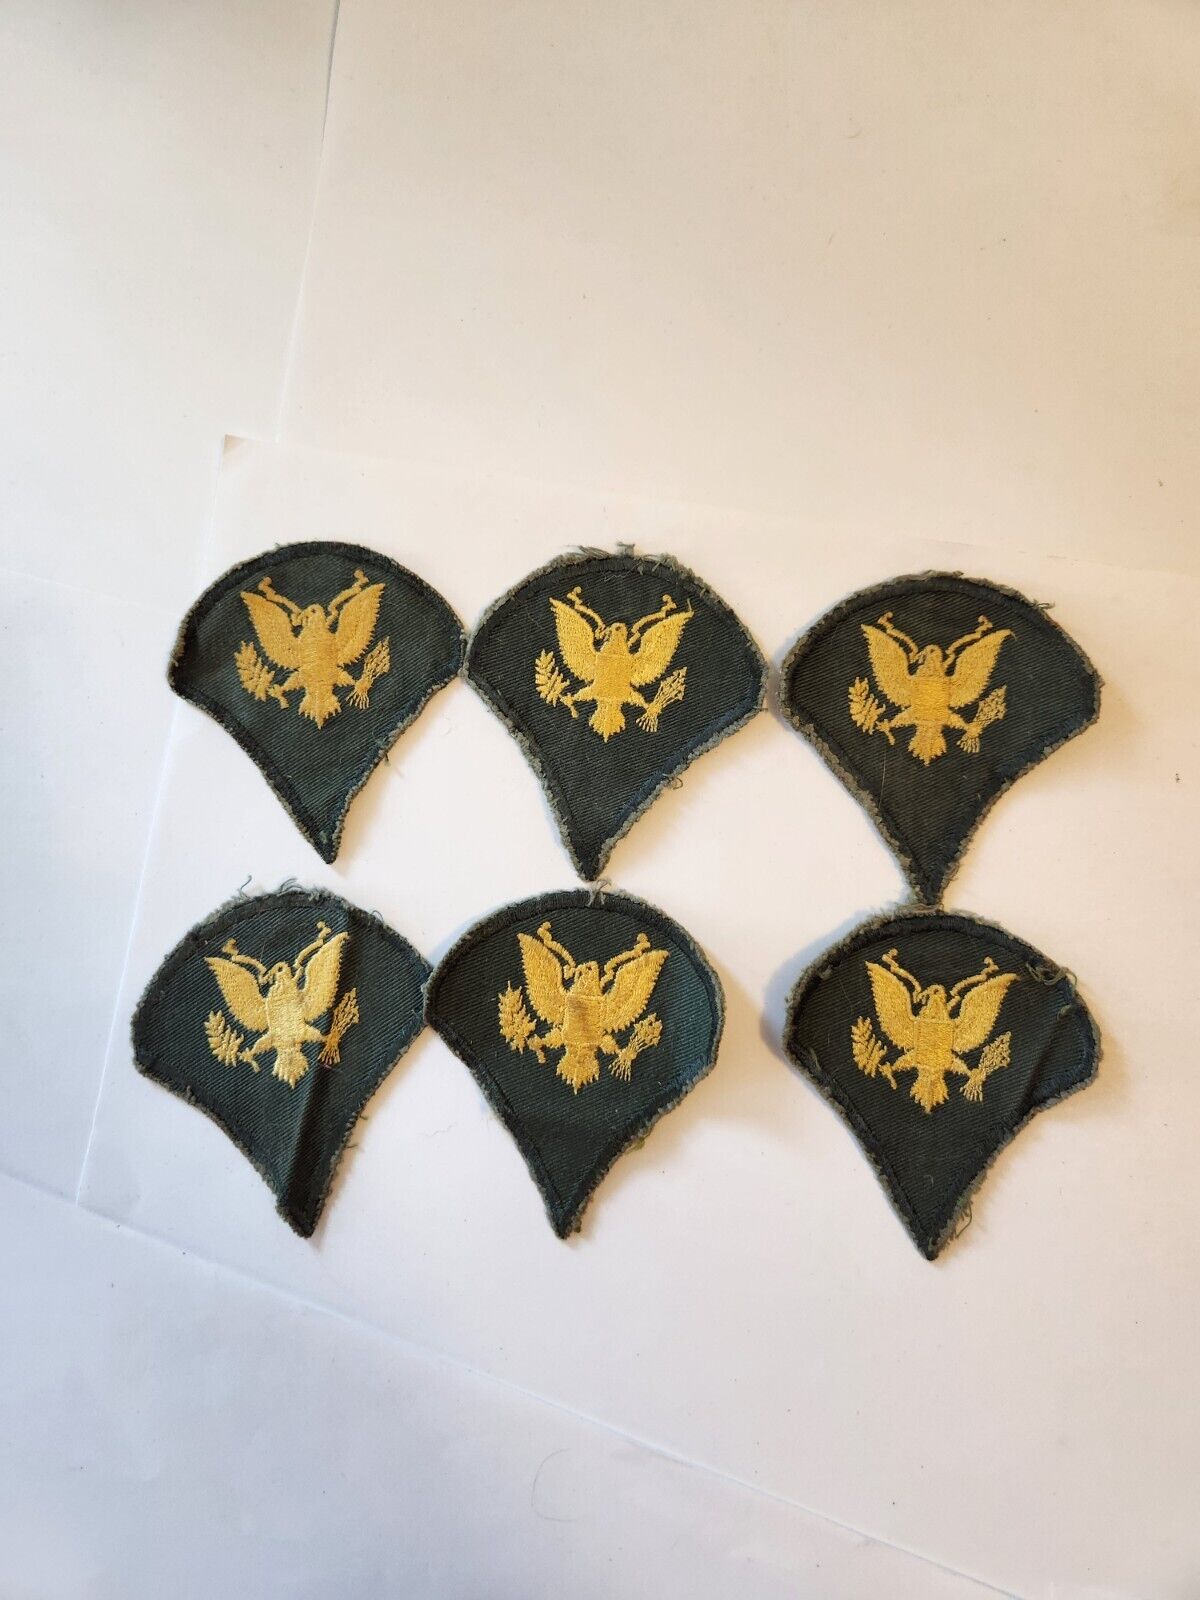 6 US Army Specialist 3rd Class Enlisted Rank Insignia Patch E-4 E4 K1* Pre-owned